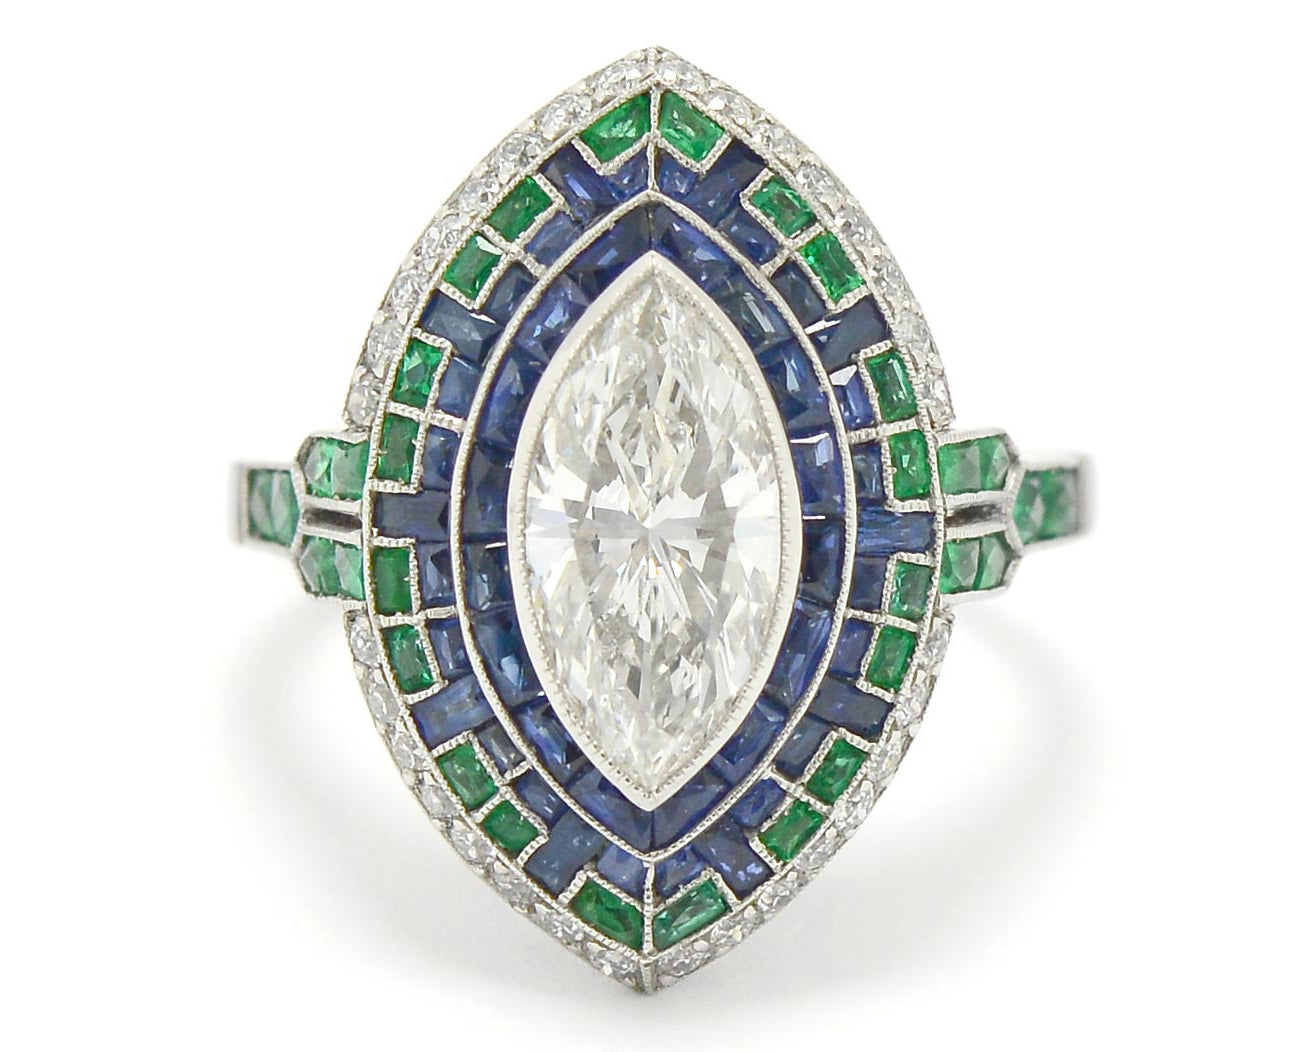 A 4 carat marquise cut diamond in a sapphire and emerald Art Deco mosaic engagement ring.